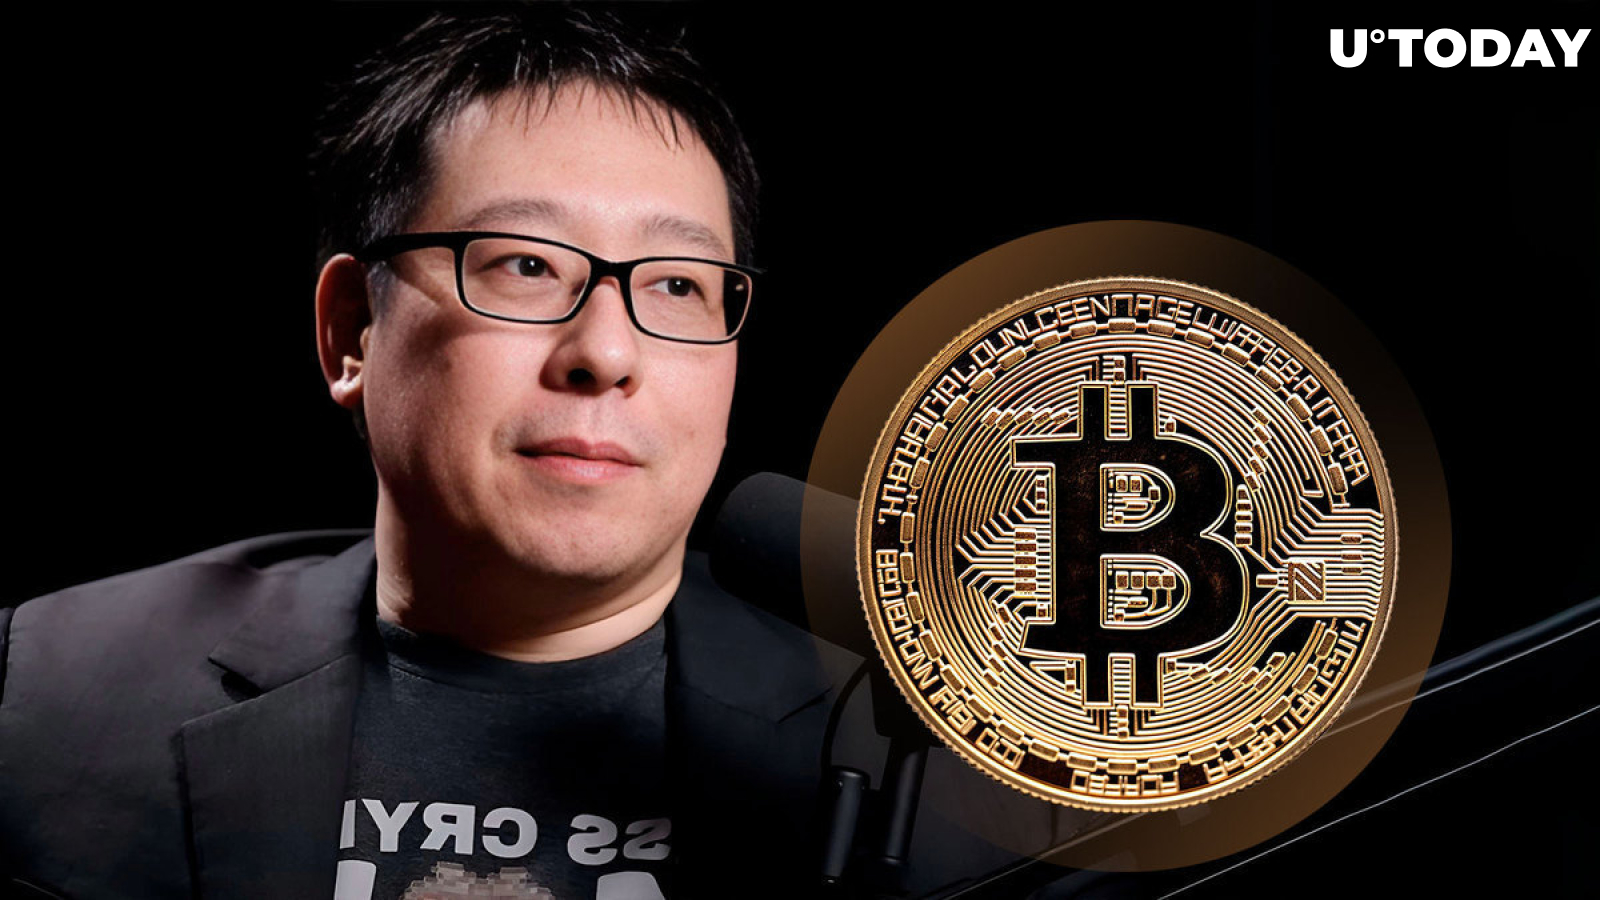 Critical Bitcoin Statement Made by Samson Mow for BTC Maxis